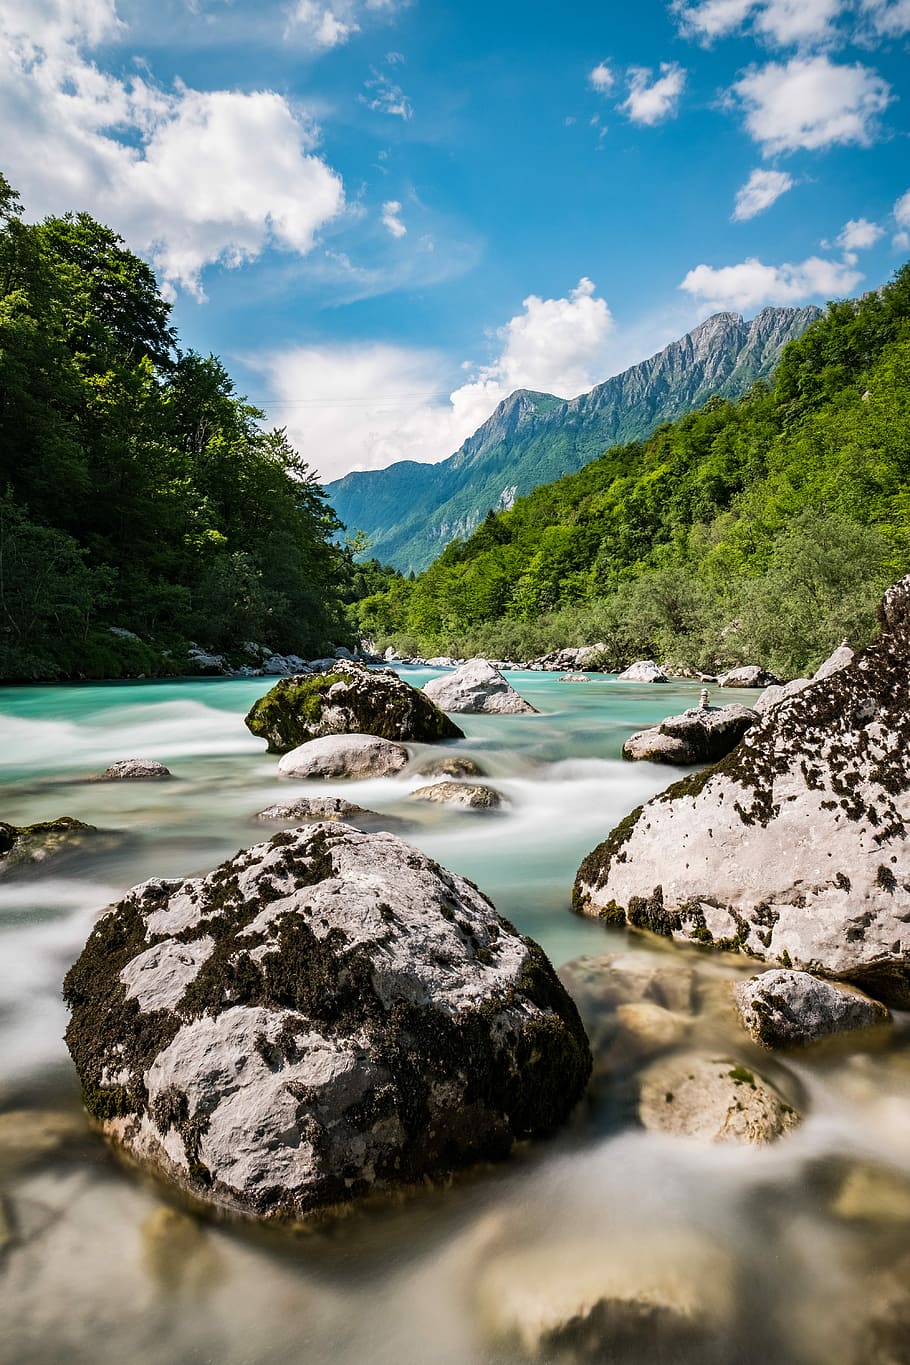 Soca River, photo of body of water and rocks, long exposure, rocky